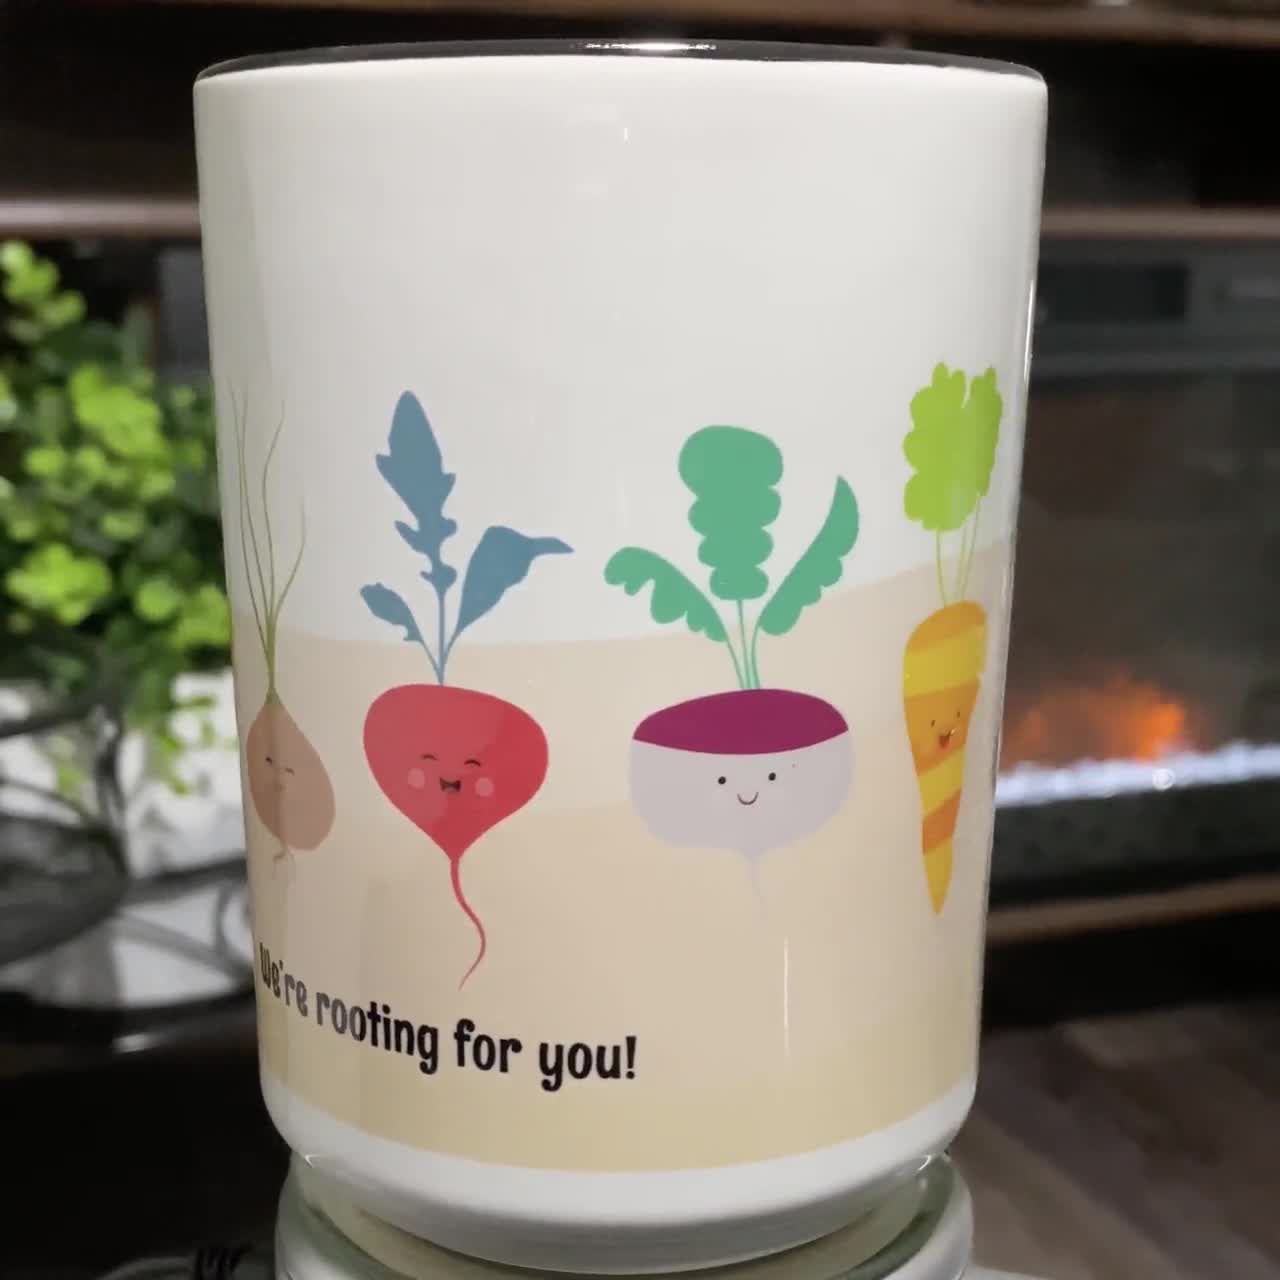 Rooting for You Veggie Coffee Mug Motivational Ceramic Microwave and Dishwasher Safe Cup 